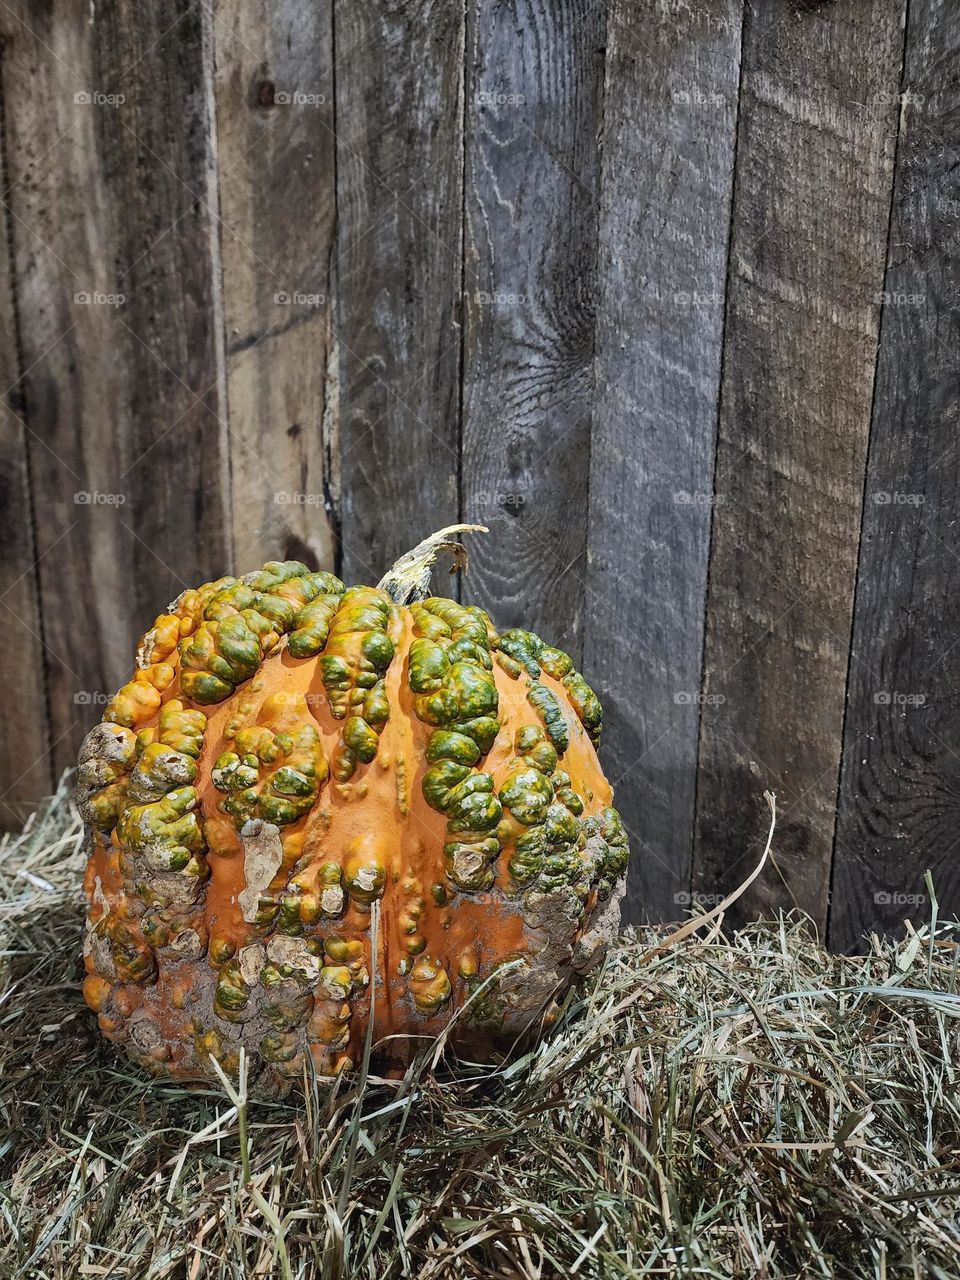 Pumpkin on a bale of hay against a barn board background.